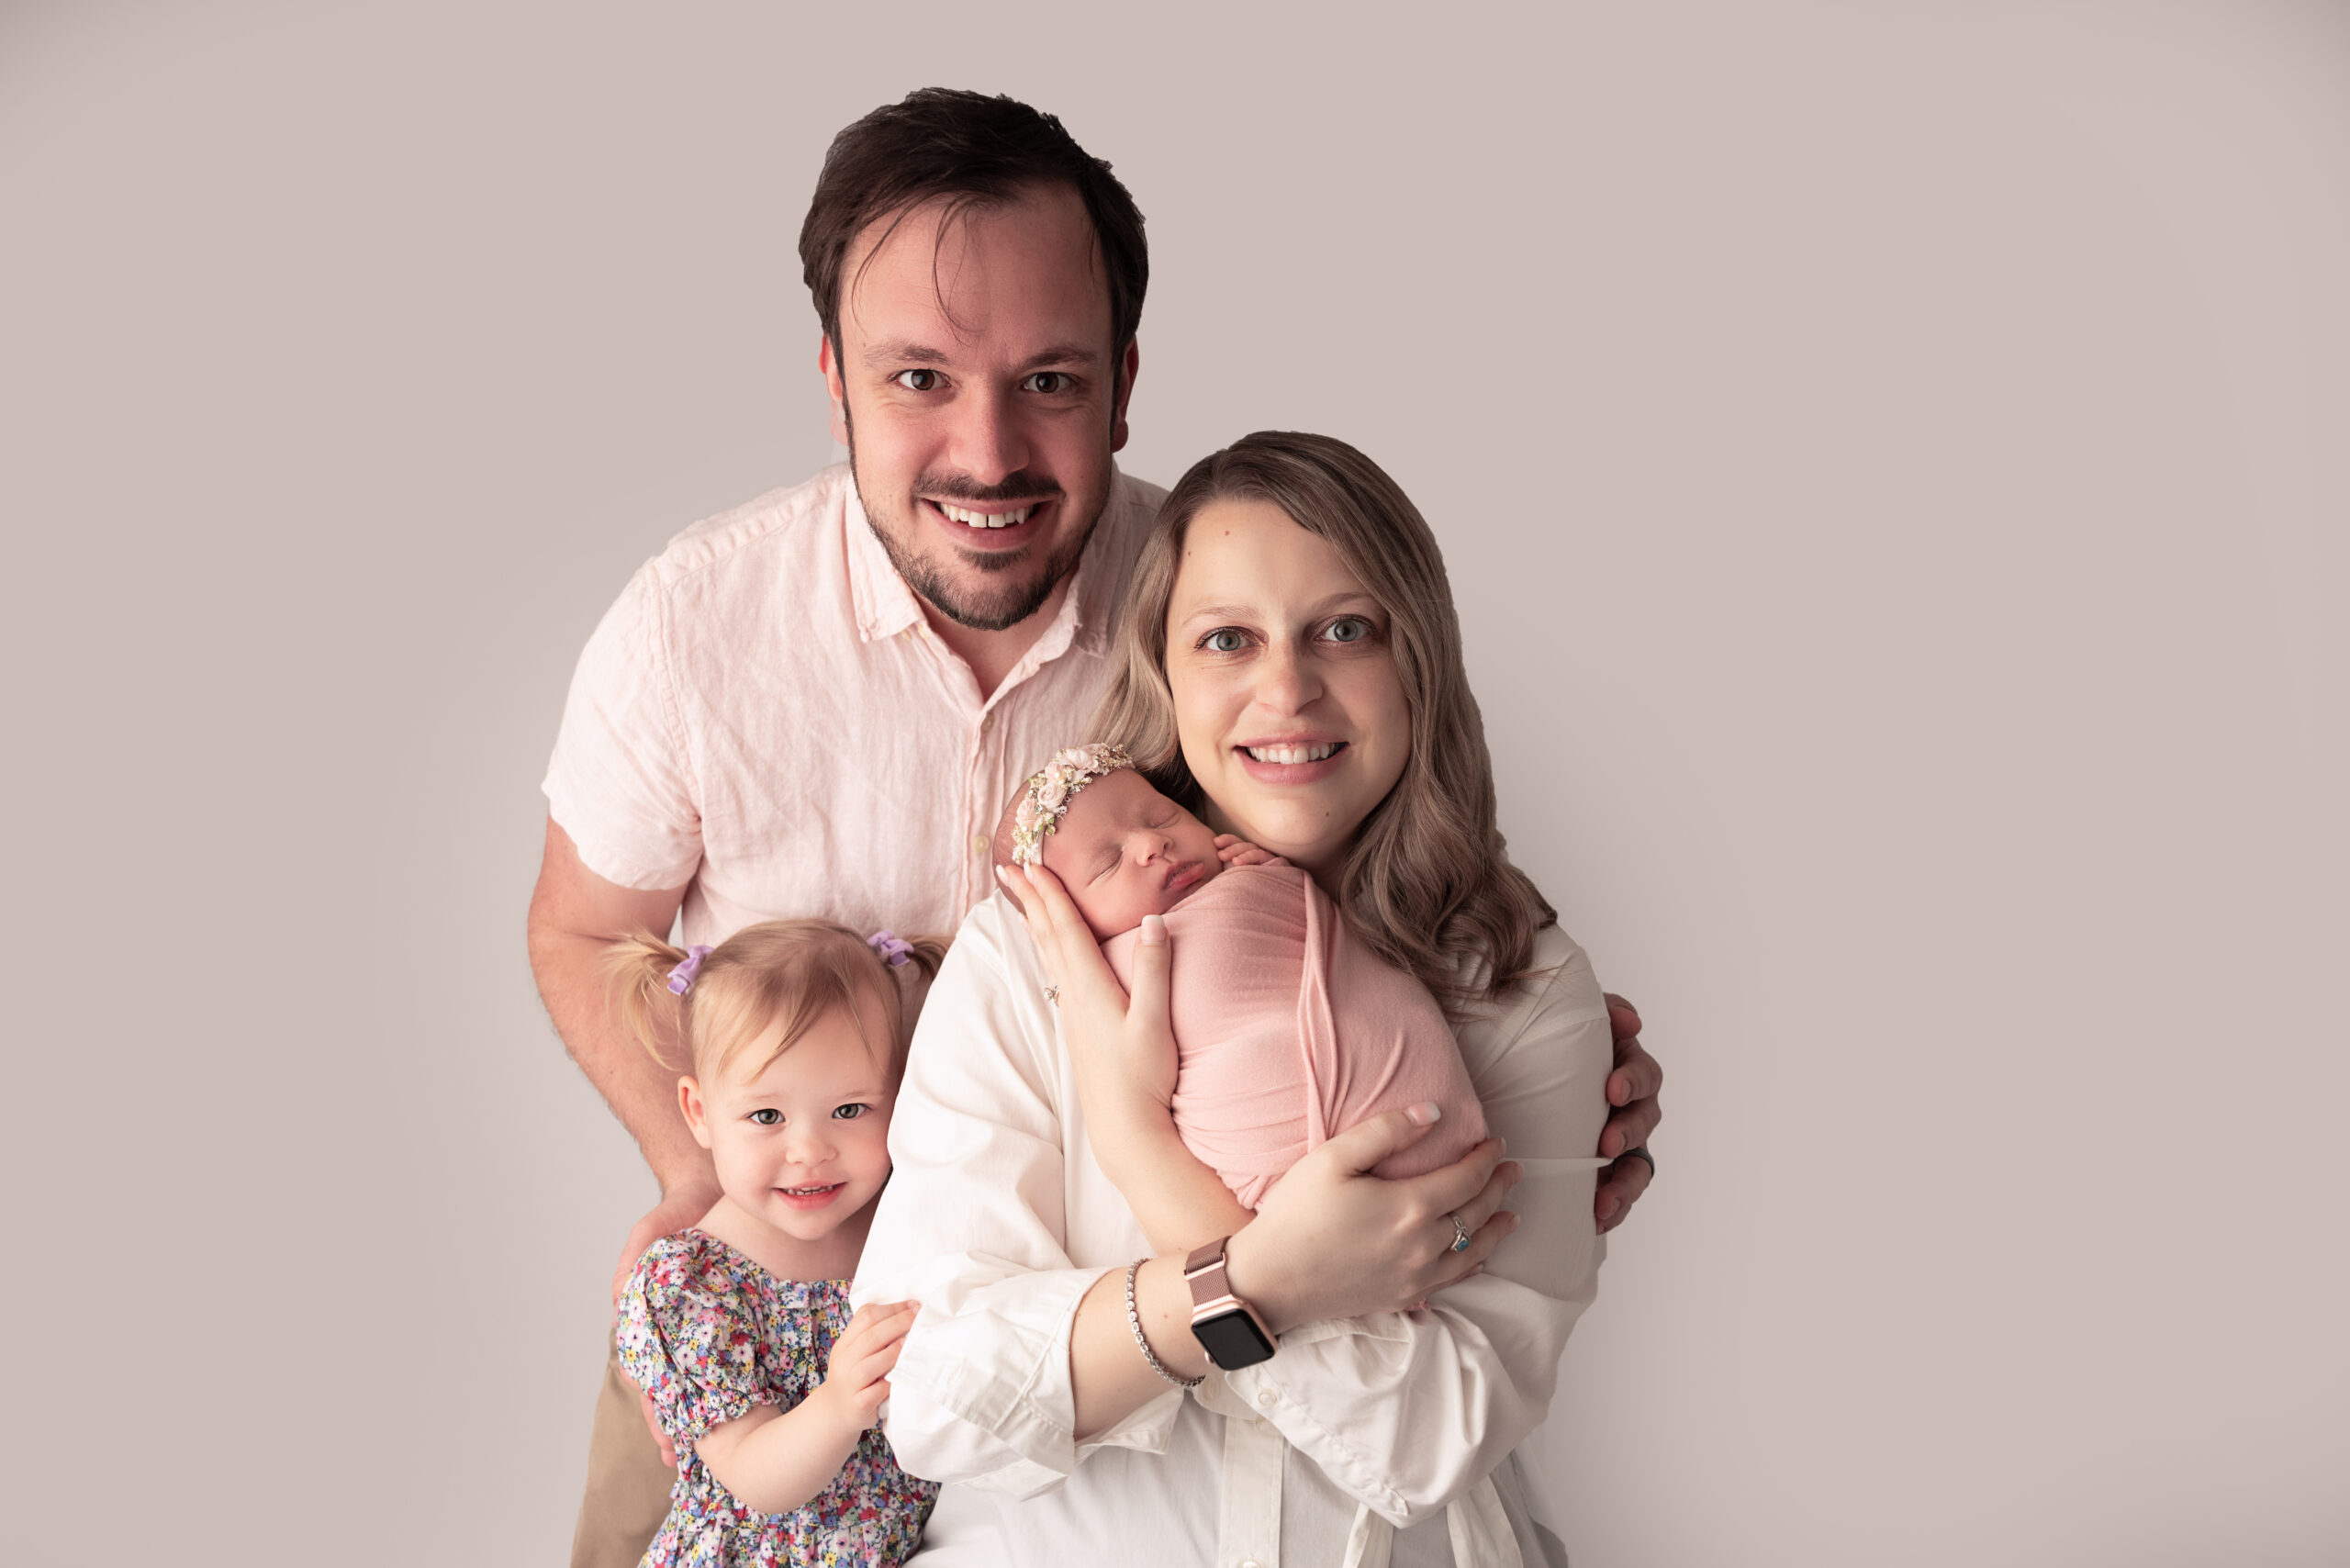 Family Portrait including mom, dad, older sibling girl in pigtails and newborn baby wrapped in pink